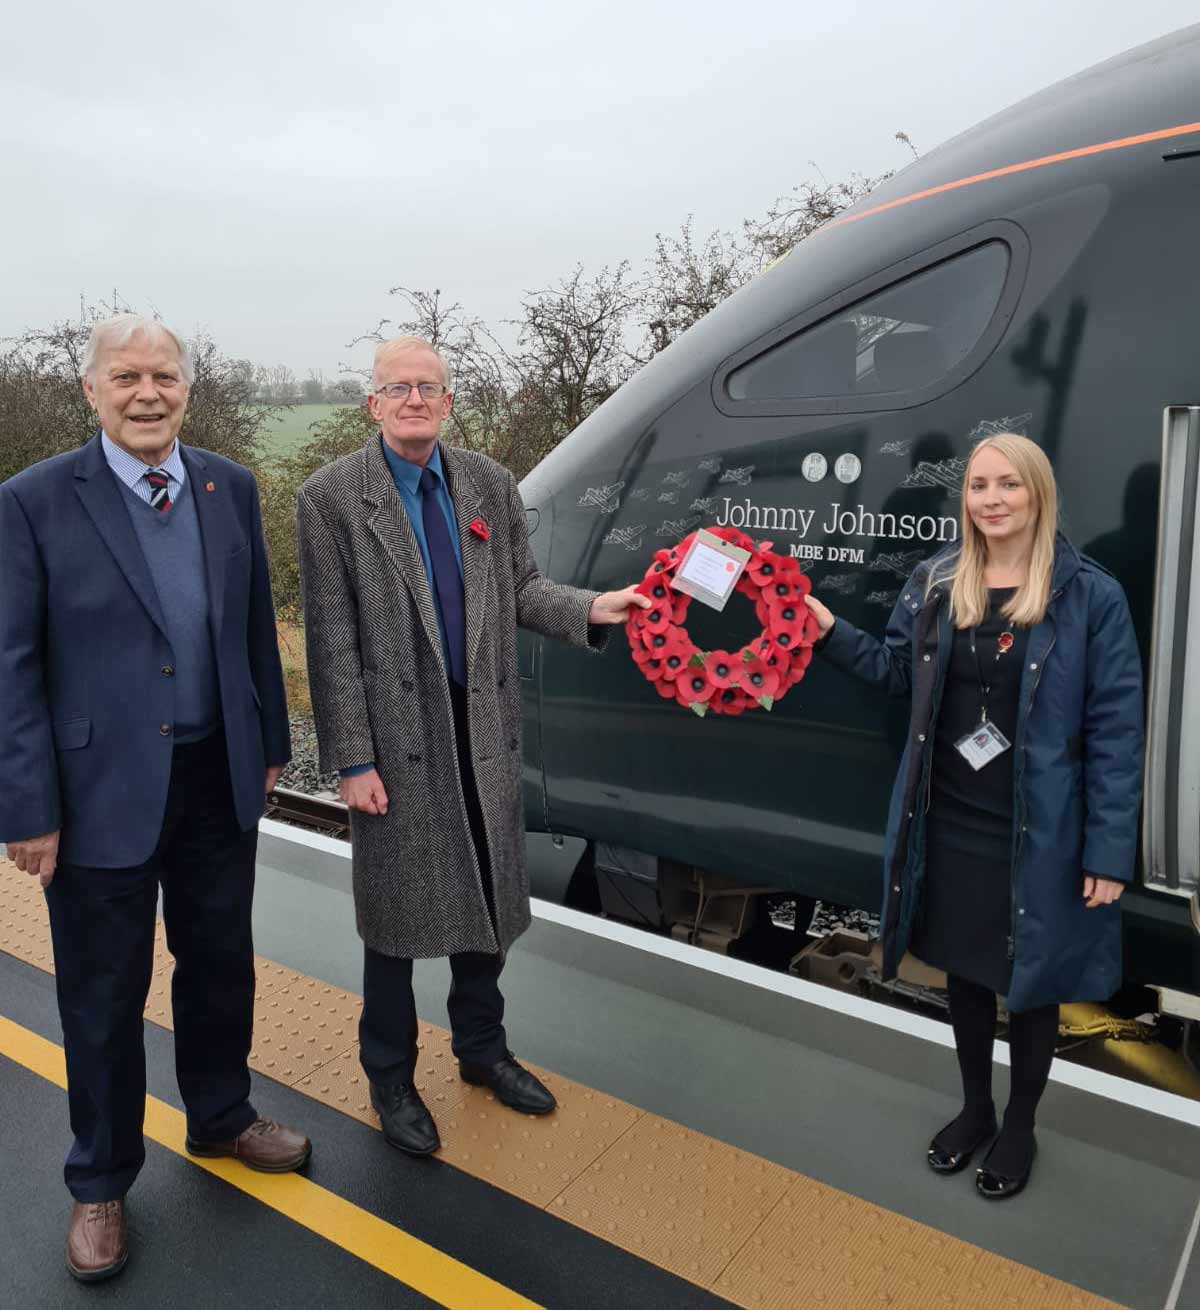 2021 GWR WCRP Remembrance Day Wreath